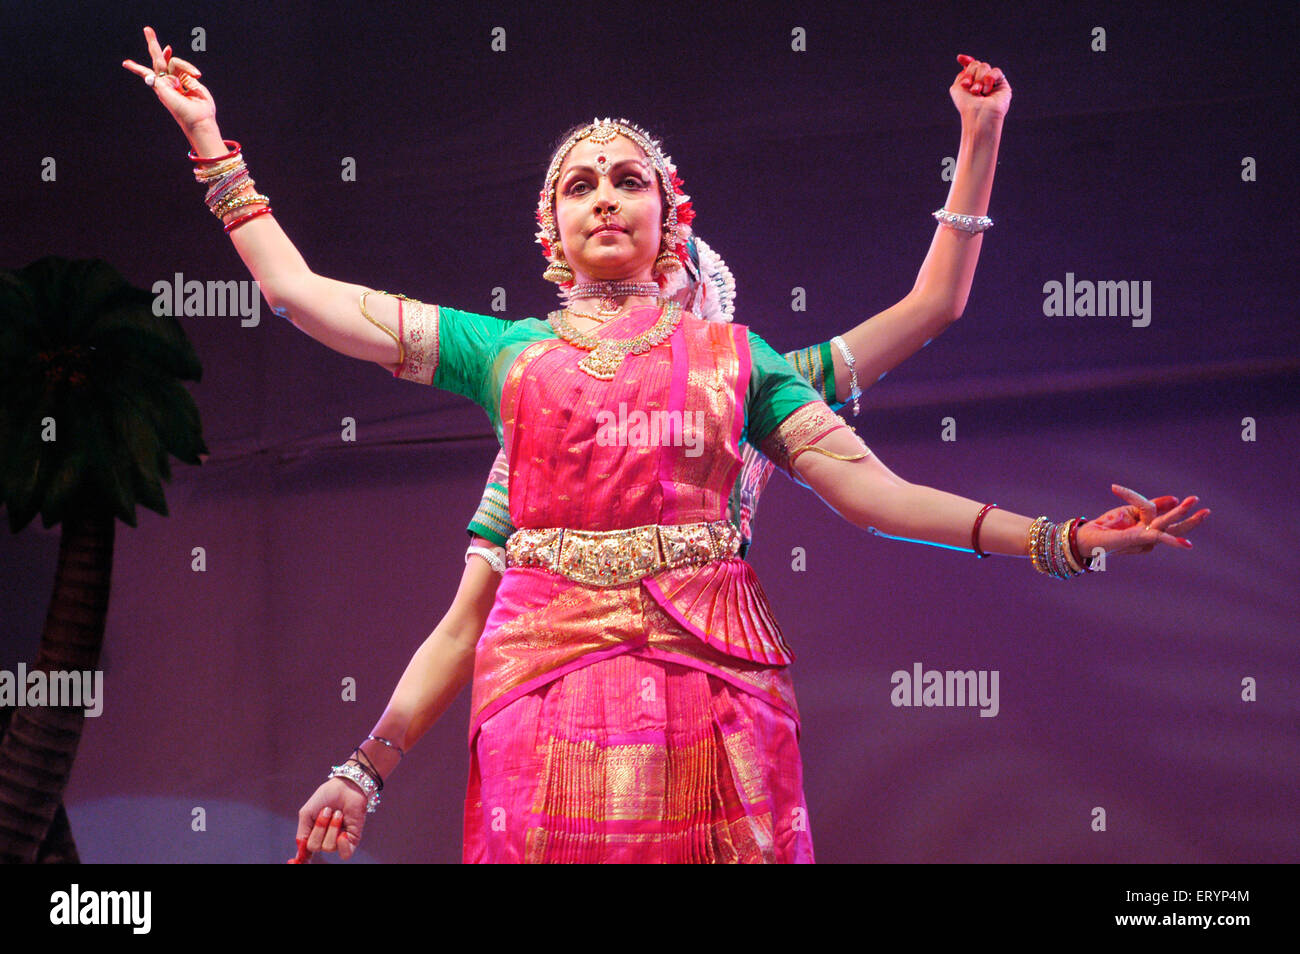 Bollywood Indian actress Hema Malini and daughter Ahana Deol performed together in piece titled Parampara Stock Photo